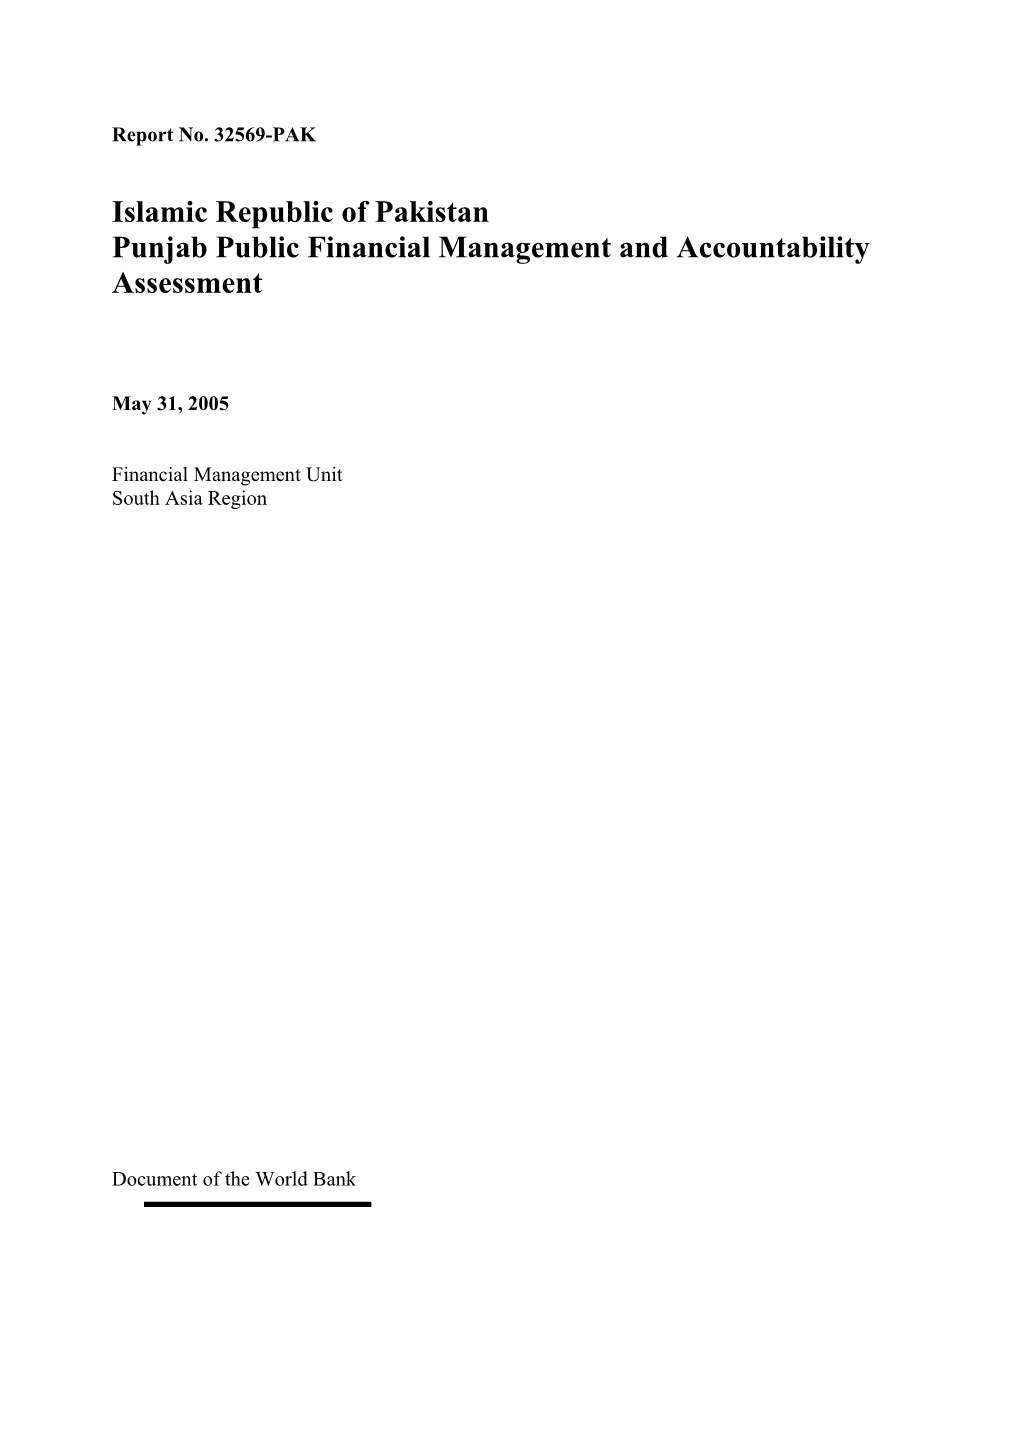 Punjab Public Financial Management and Accountability Assessment